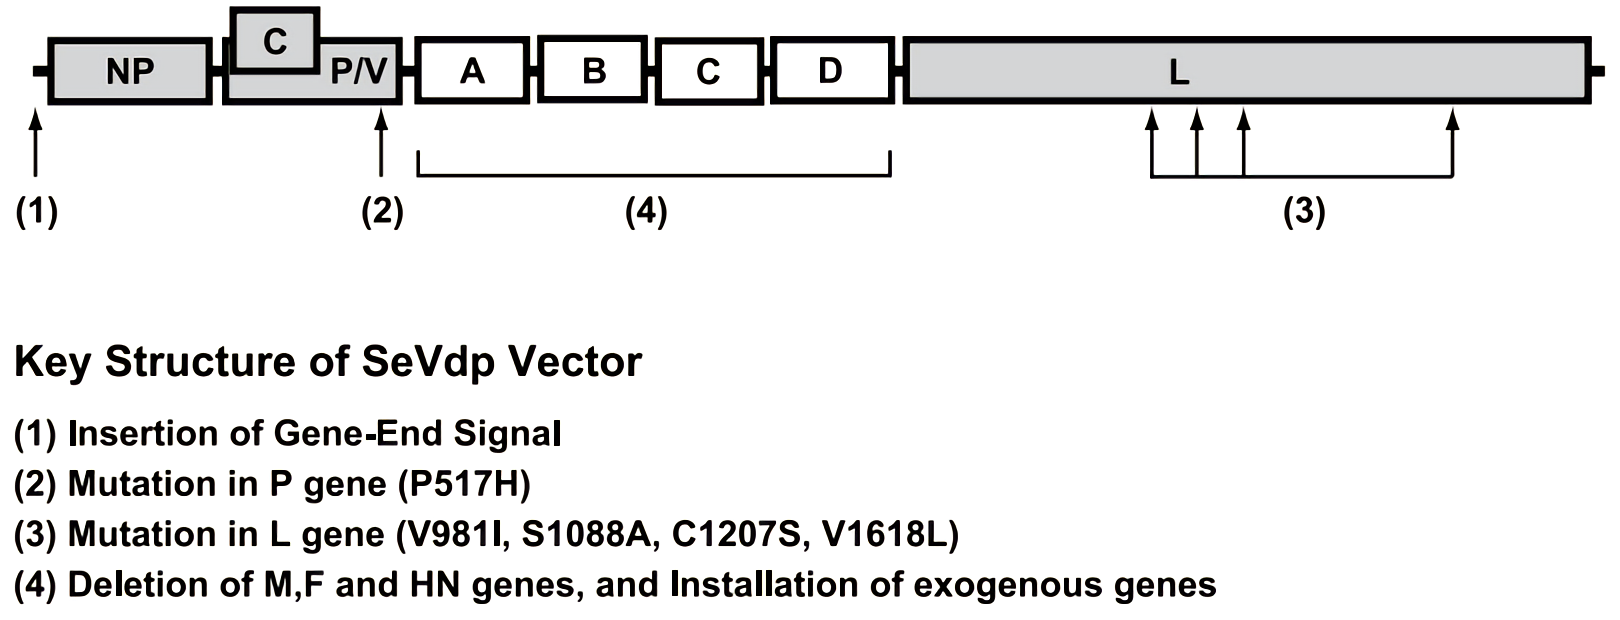 The genomic structure of the defective and persistent Sendai virus (SeVdp) vector. SeVdp has mutations in the L and P genes that result in low cytotoxicity and defective induction of IFN-β. The M, F and HN genes are deleted and replaced with the gene of interest (A-D).